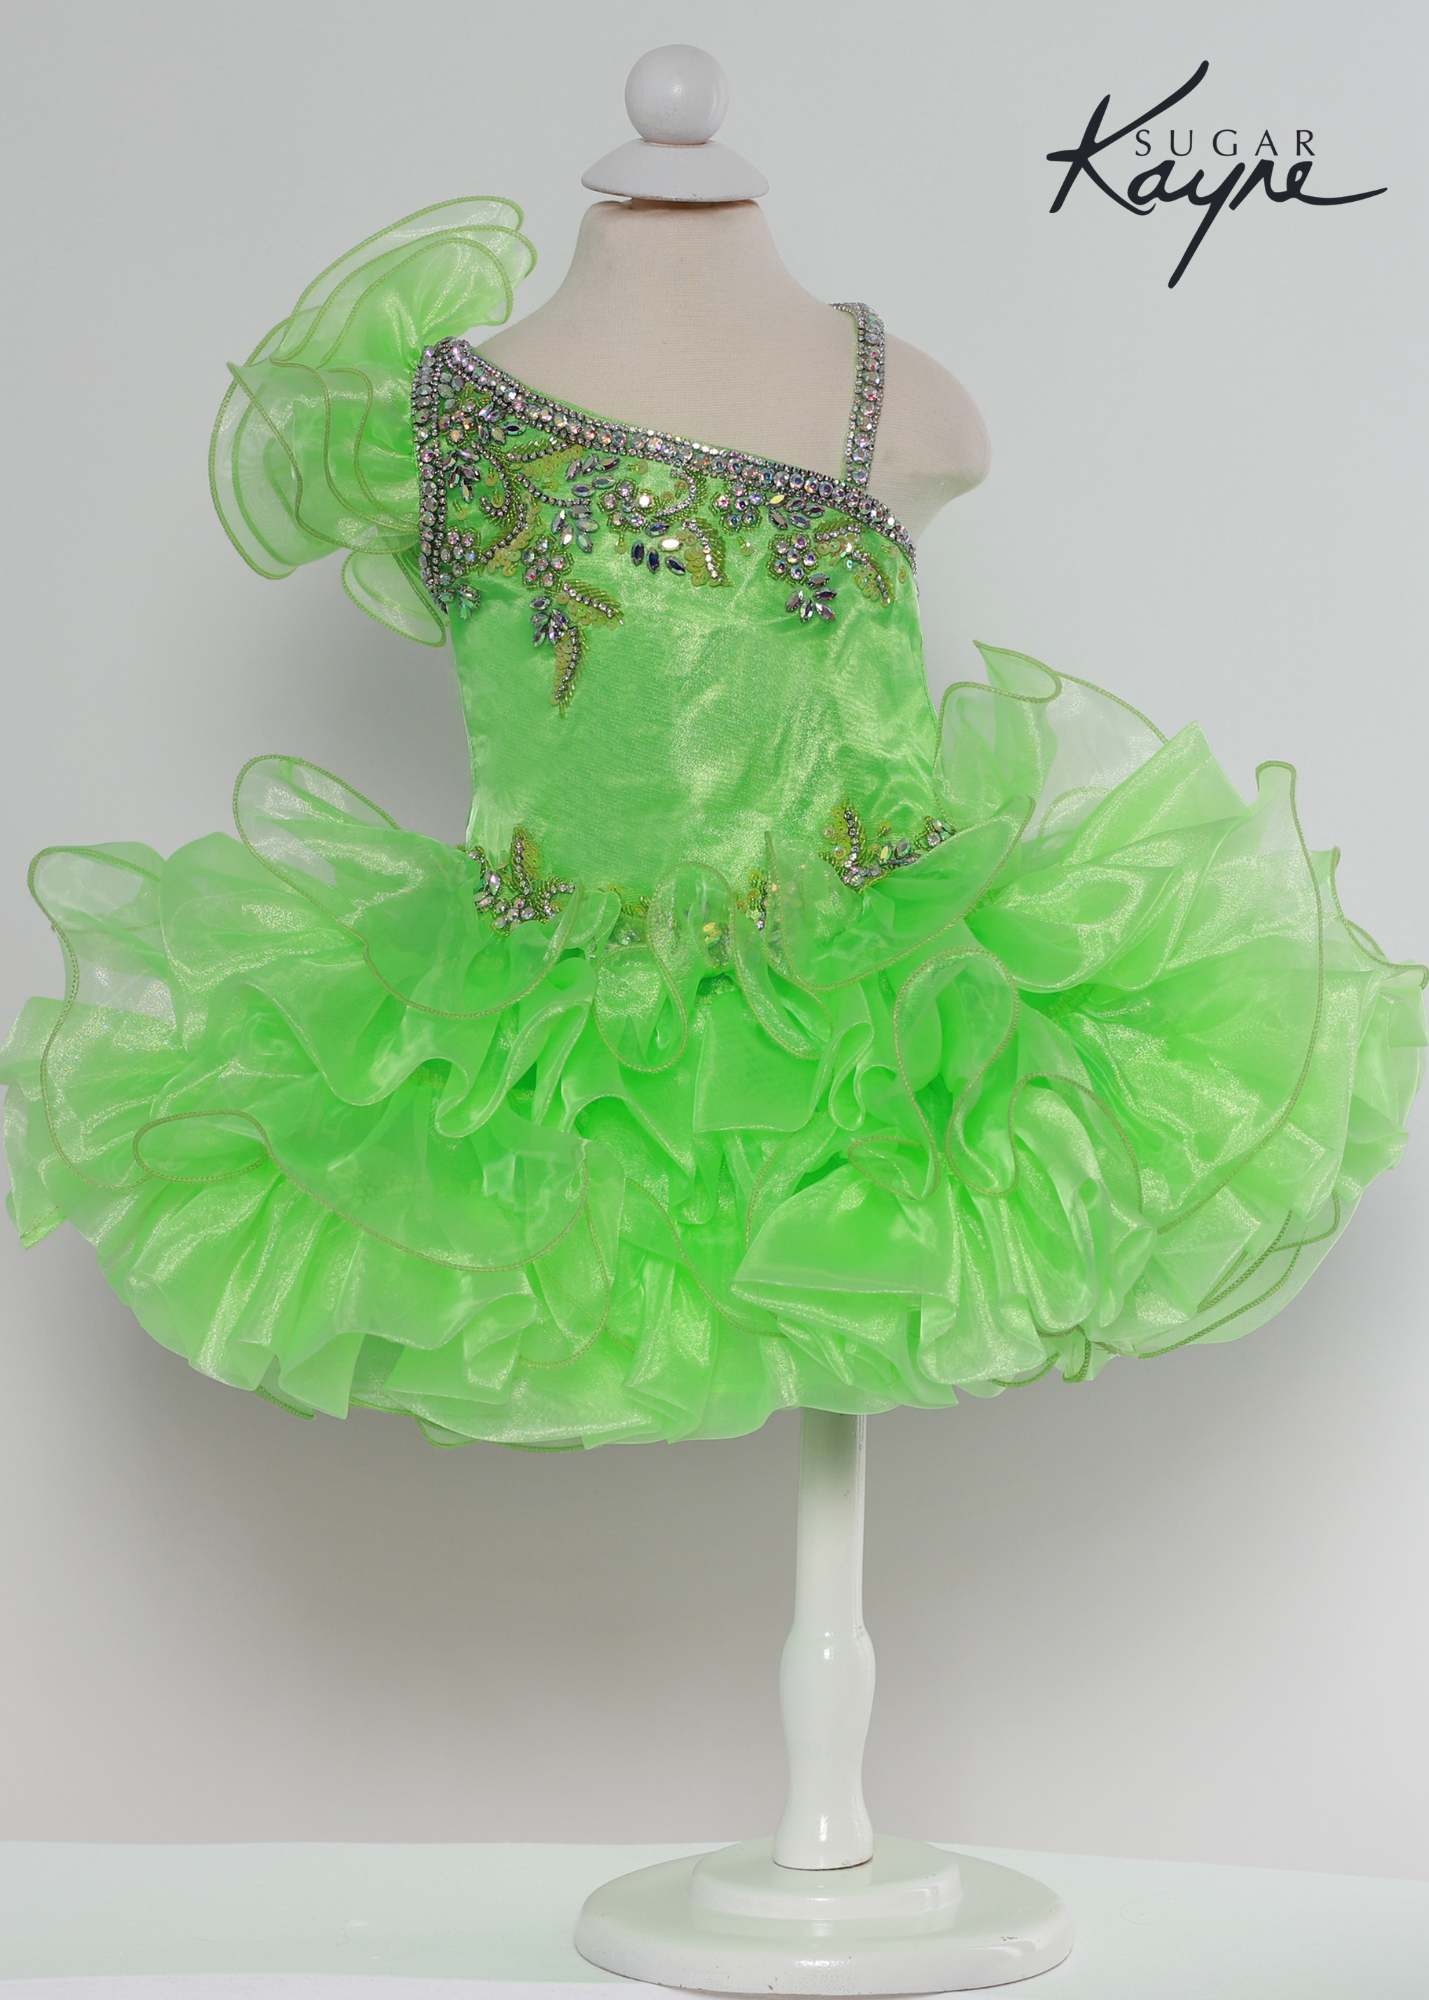 Sugar Kayne C215 Girls Short Cupcake Ruffle One Shoulder Pageant Dress Bow Corset Have your little cupcake bring on all the charm in this stunning organza gown. The corset back is the perfect addition as the little one grows!  Colors: Kiwi, Neon Orange, White  Sizes: 0M, 12M, 18M, 24M, 2T, 3T, 4T, 5T, 6M, 6T  Fabric Organza, Satin Lining